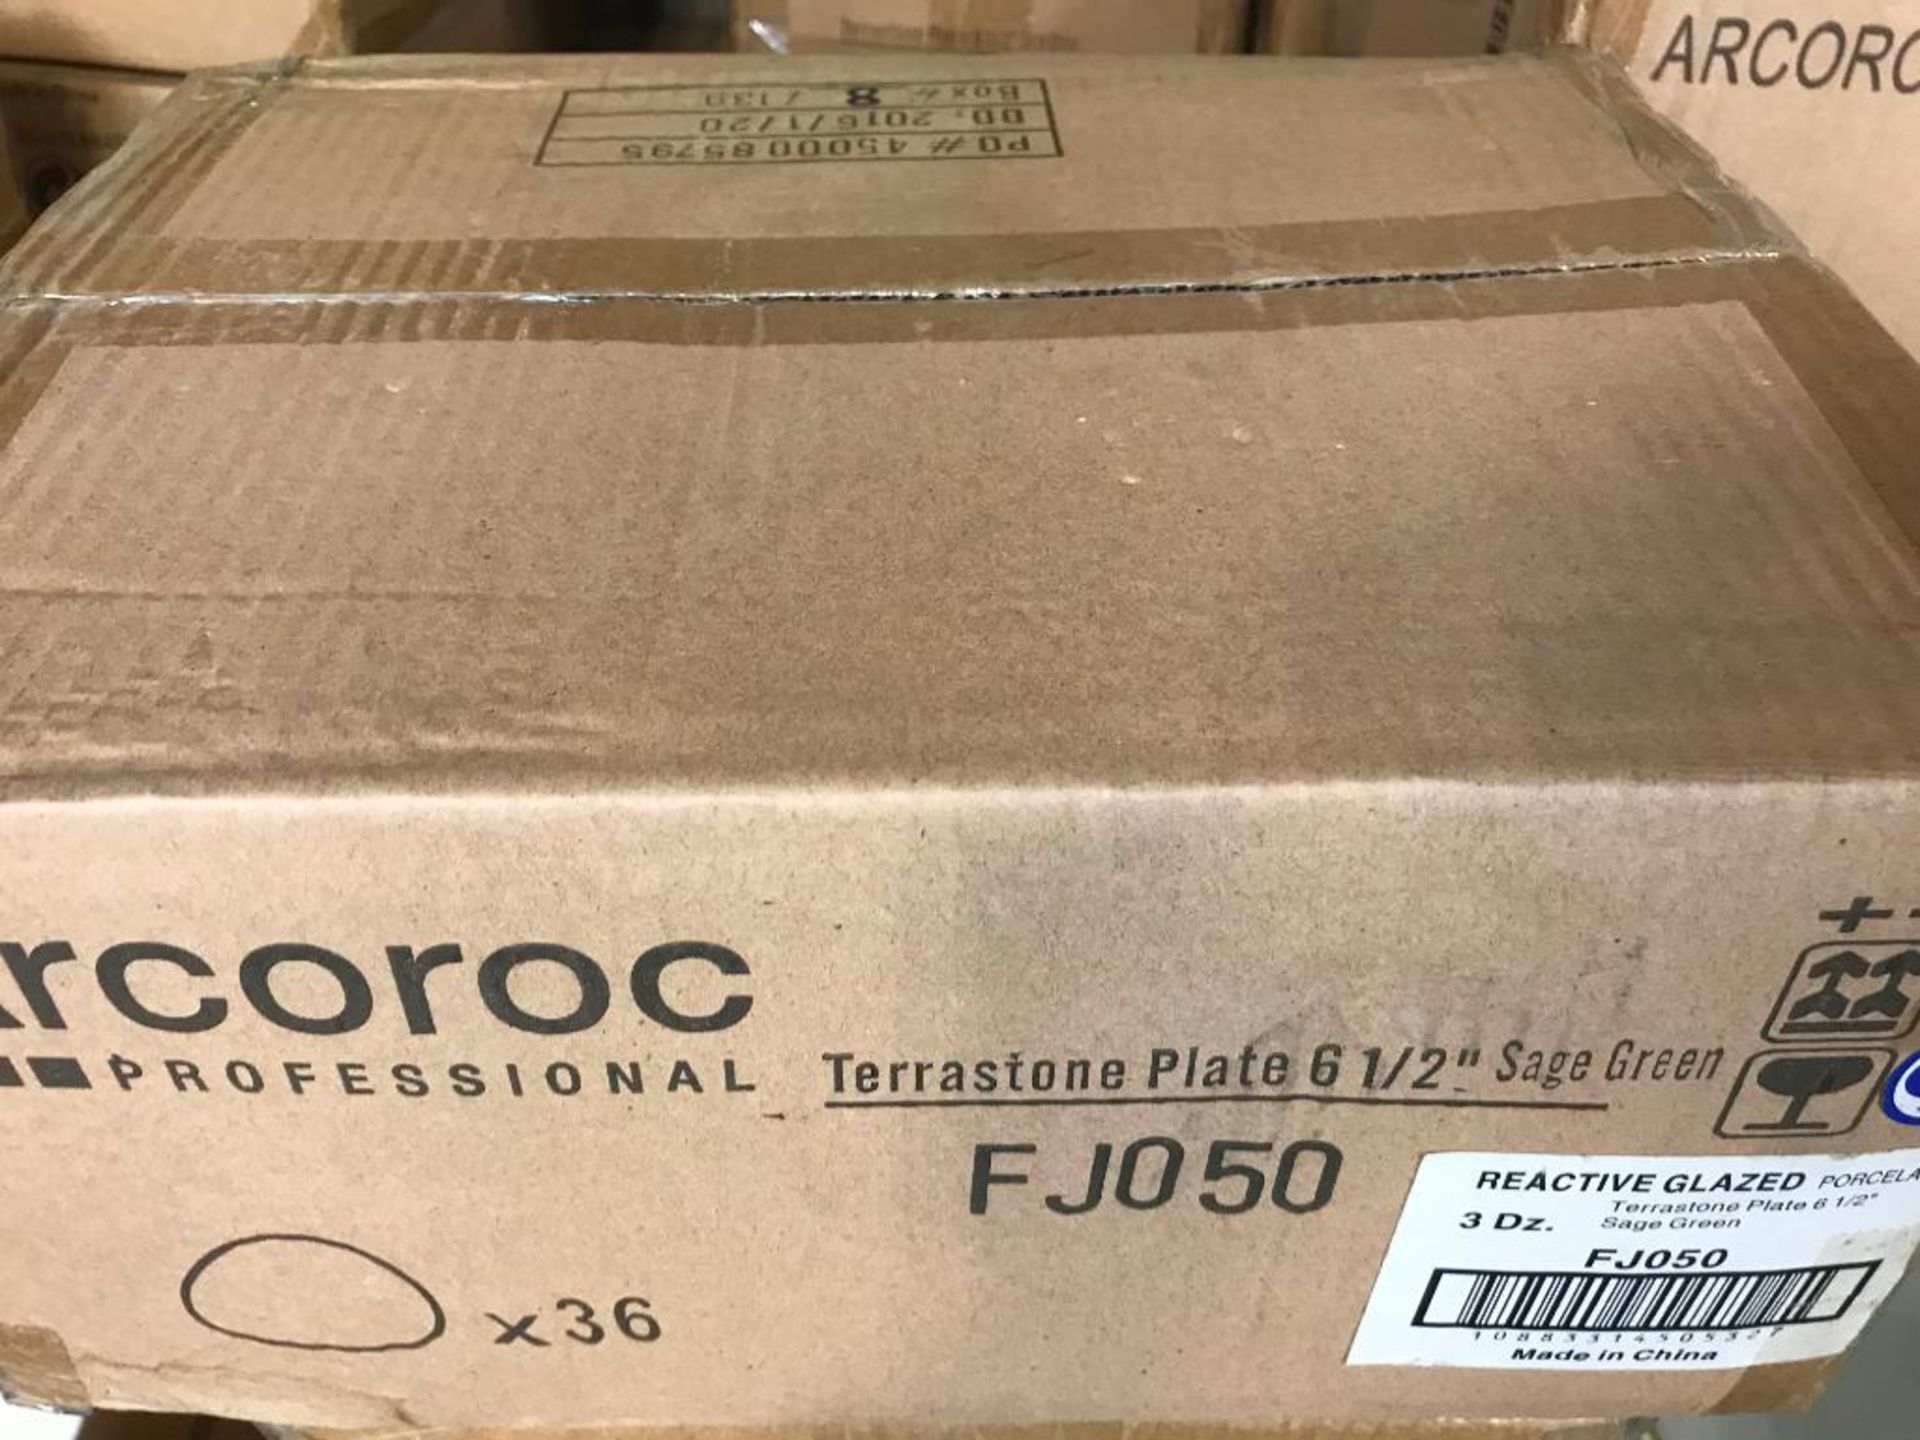 CASE OF TERRASTONE 6 1/2" SAGE GREEN PLATE - 36/CASE, ARCOROC - NEW - Image 2 of 3